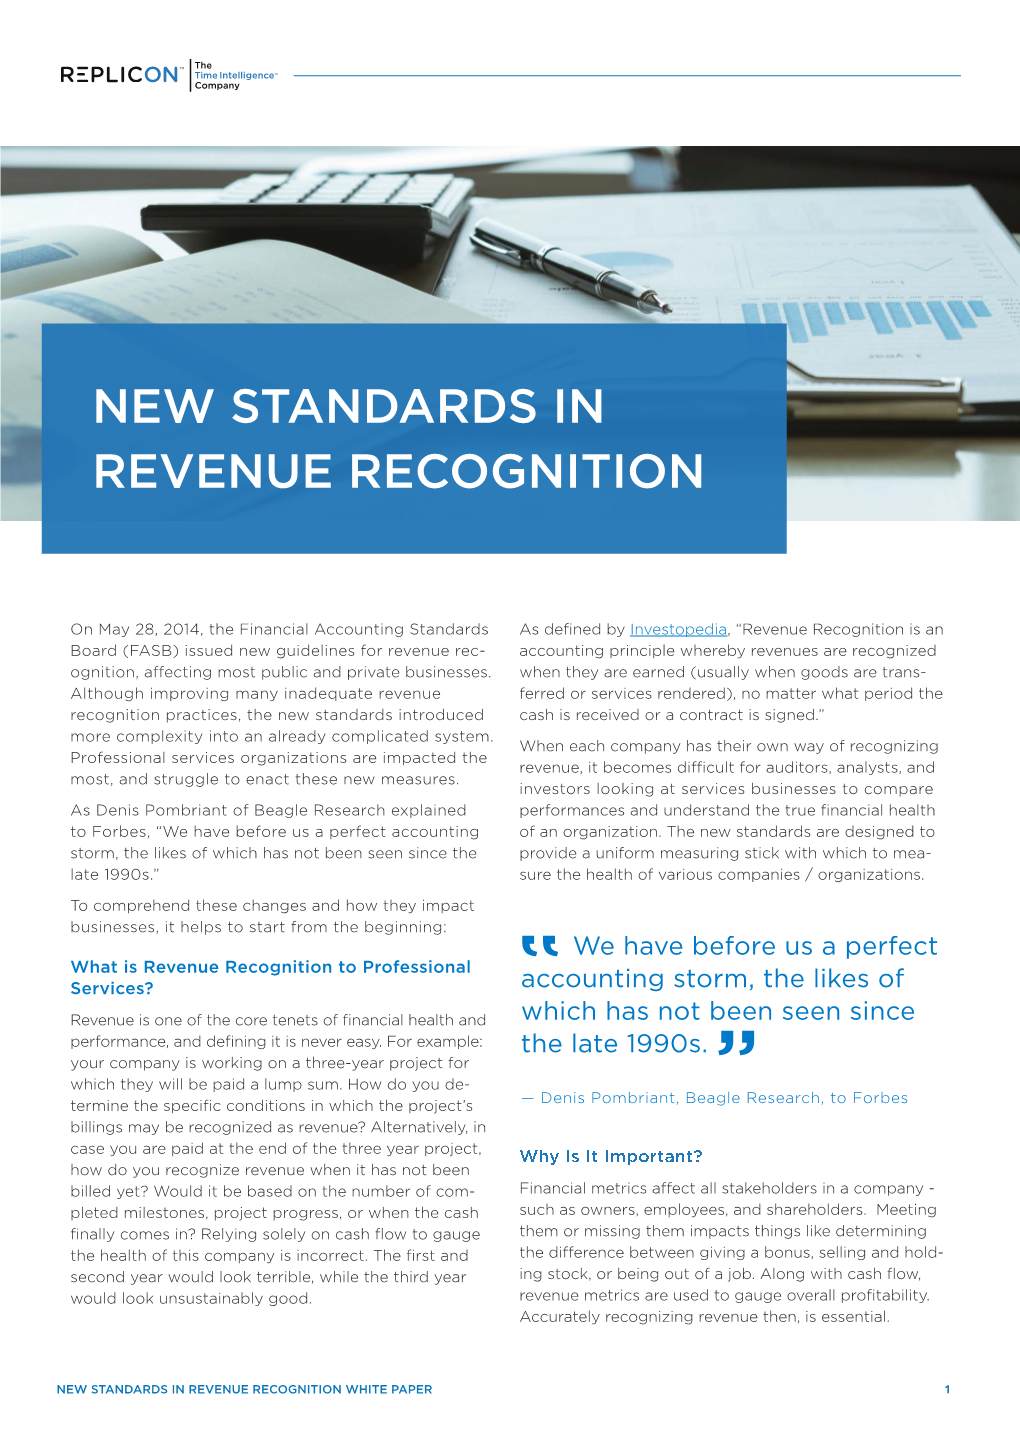 New Standards in Revenue Recognition